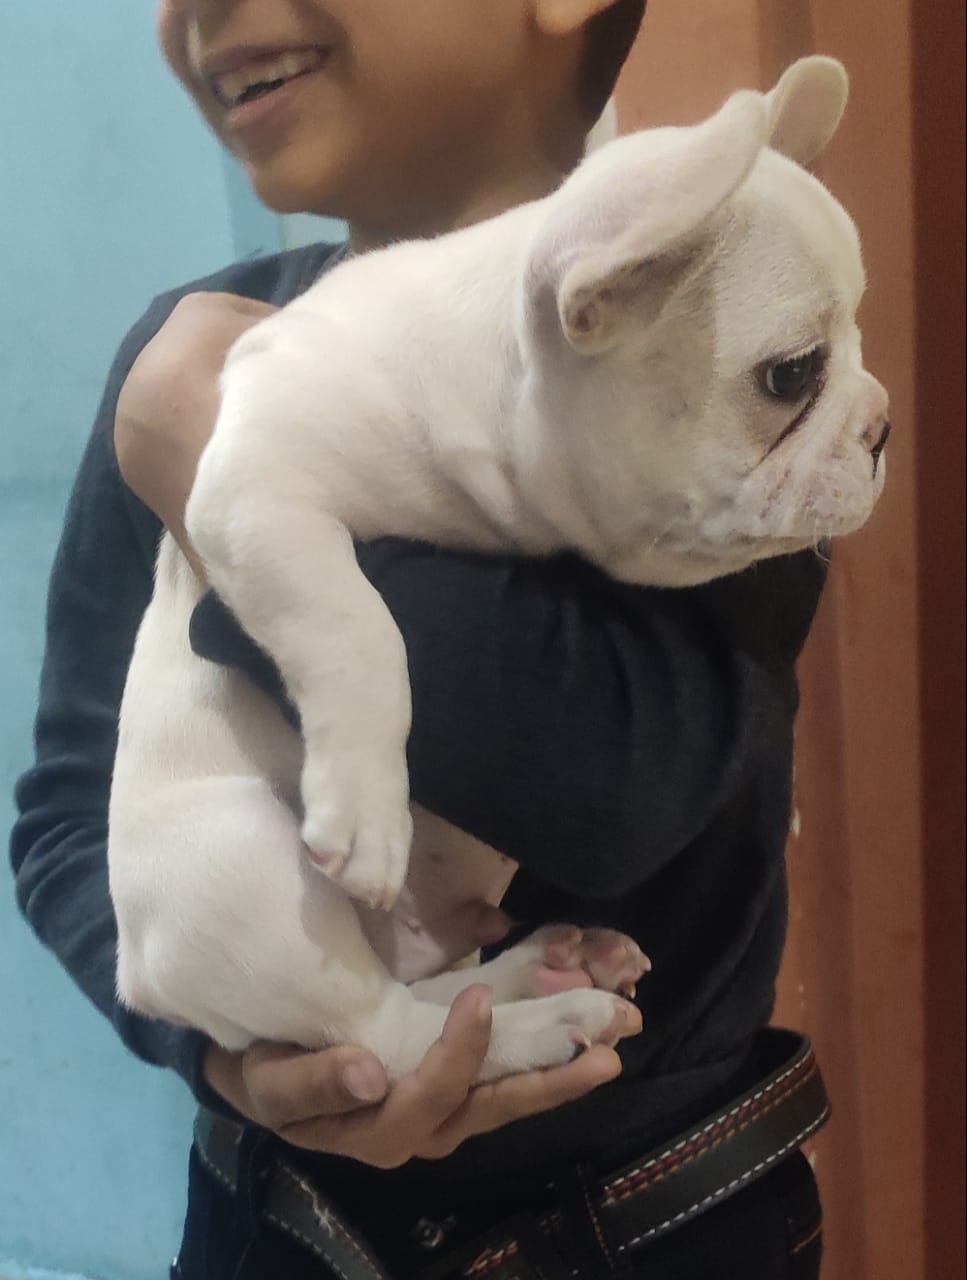 Image of FRENCH BULLDOG posted on 2022-03-26 13:00:08 from Delhi